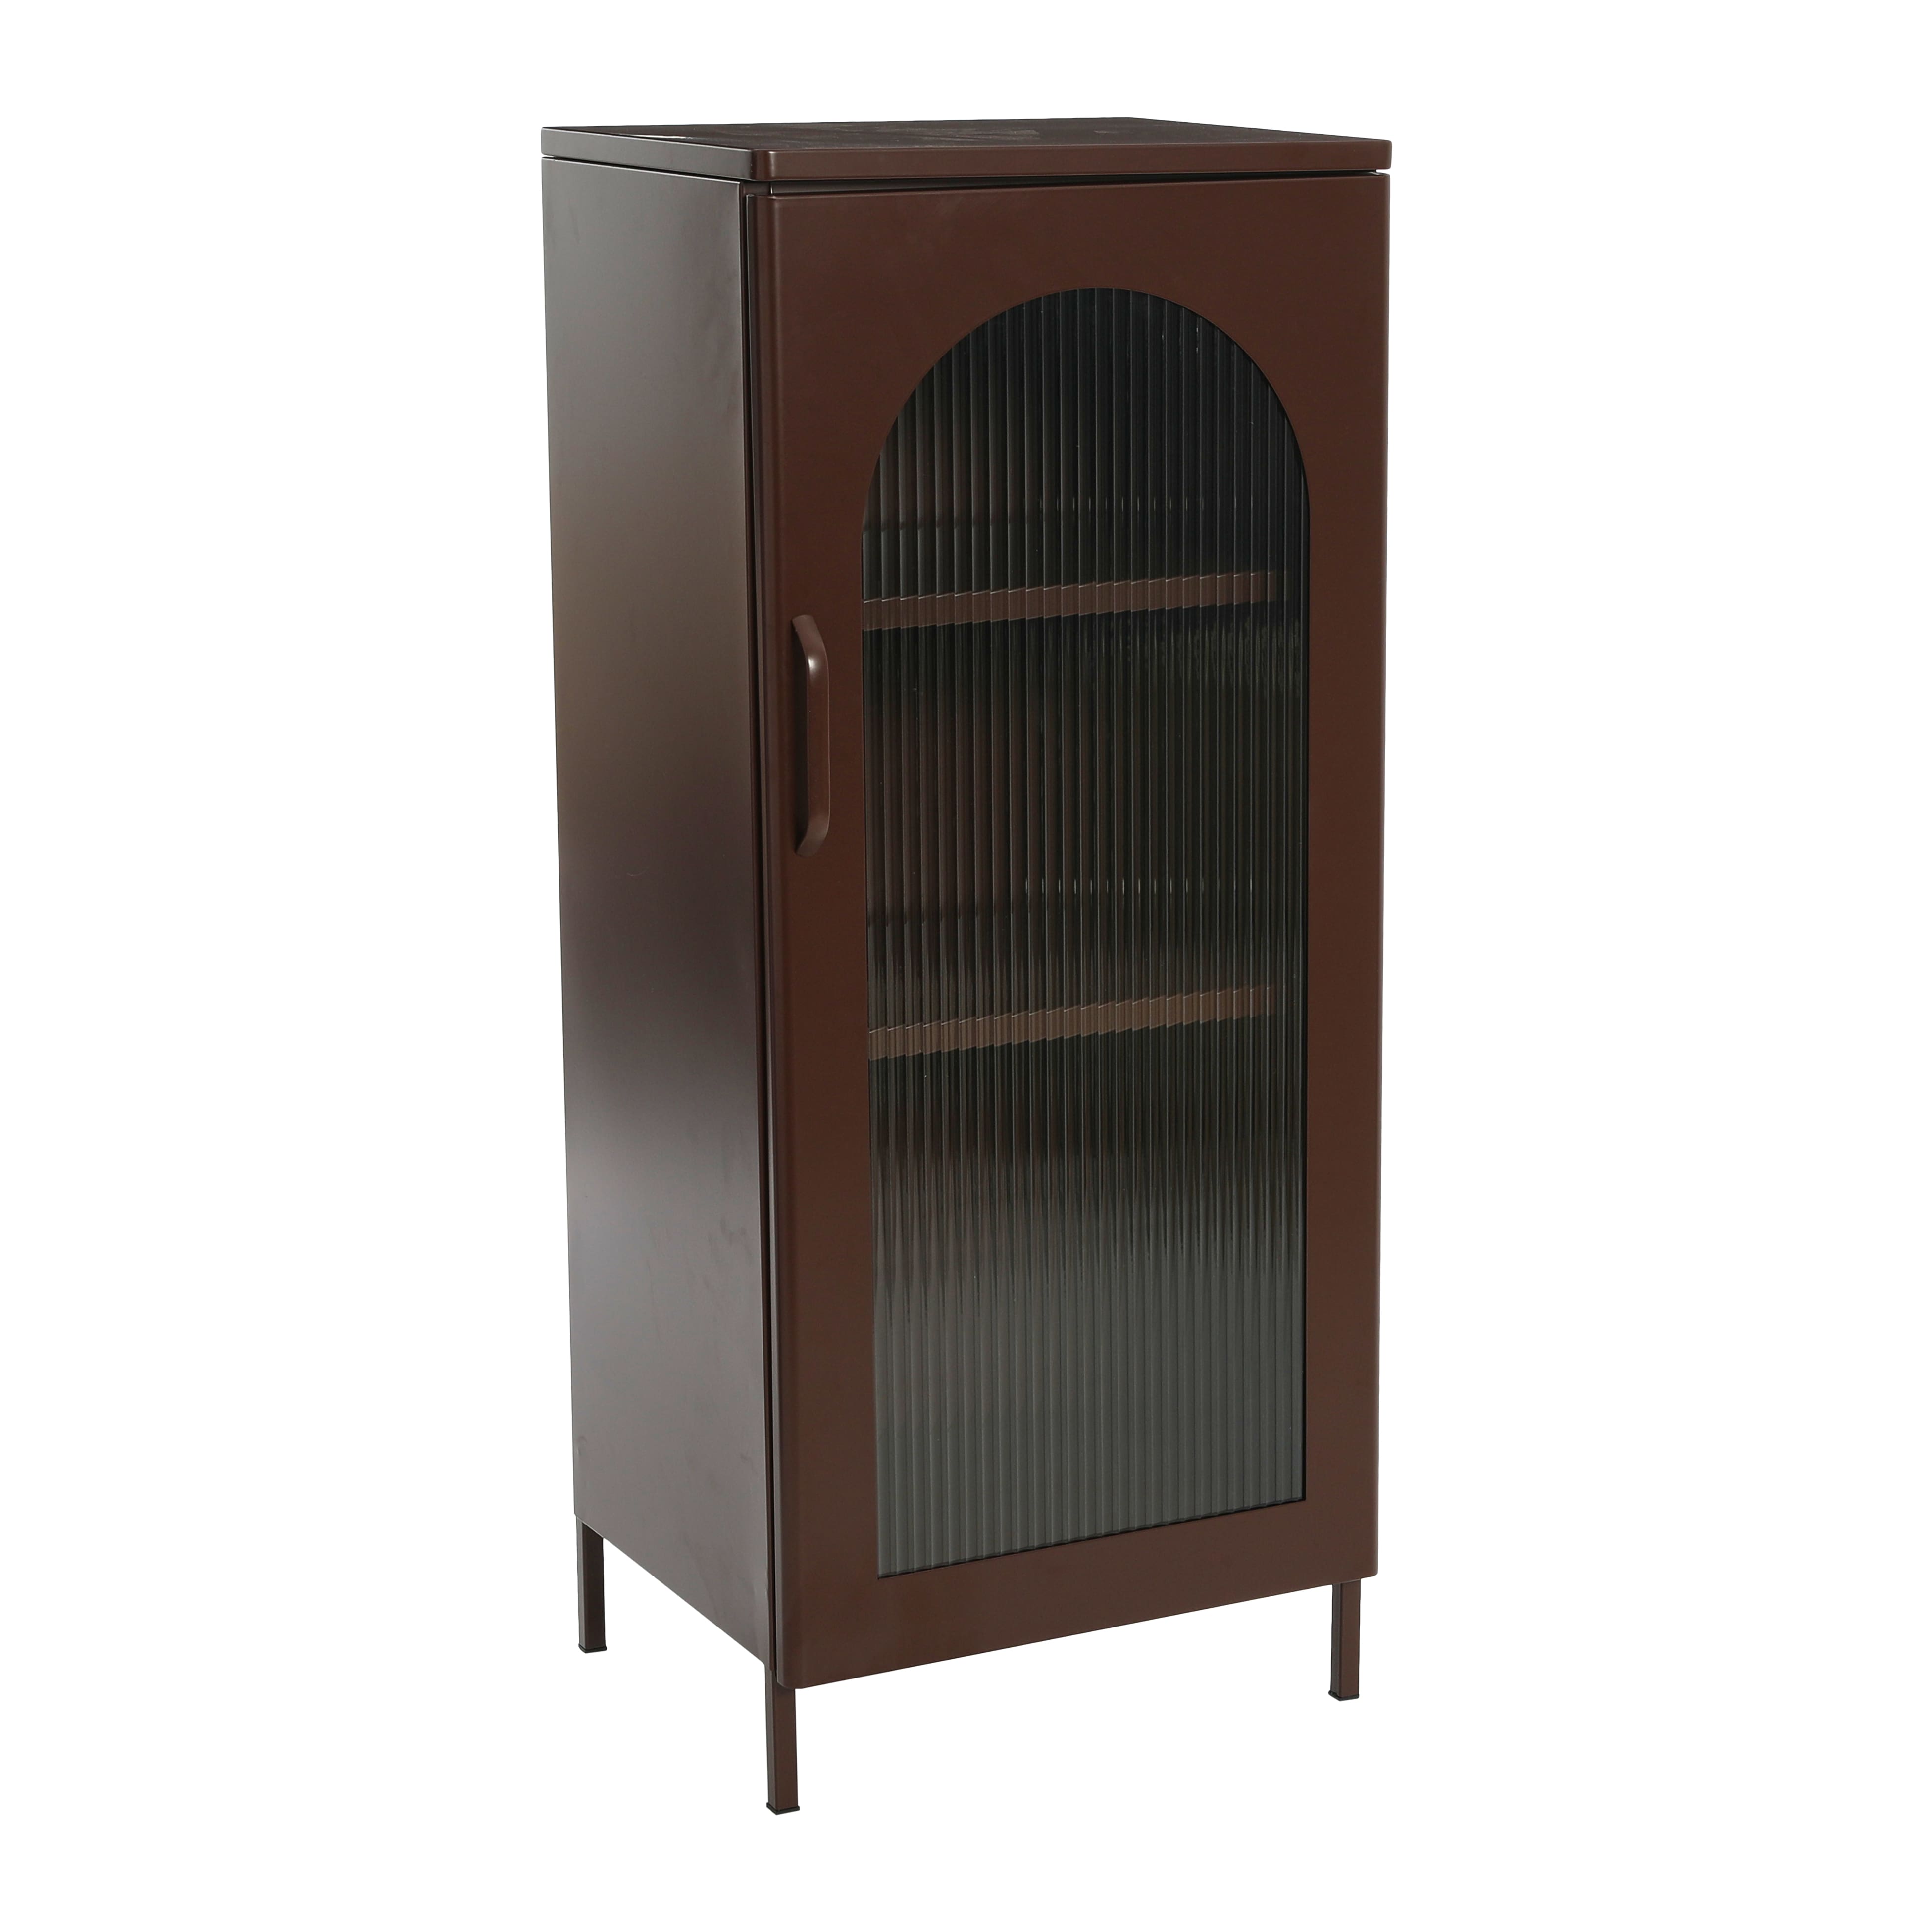 40" Solstice Narrow Metal Accent Cabinet with Adjustable Storage Shelves and Arched Glass Door